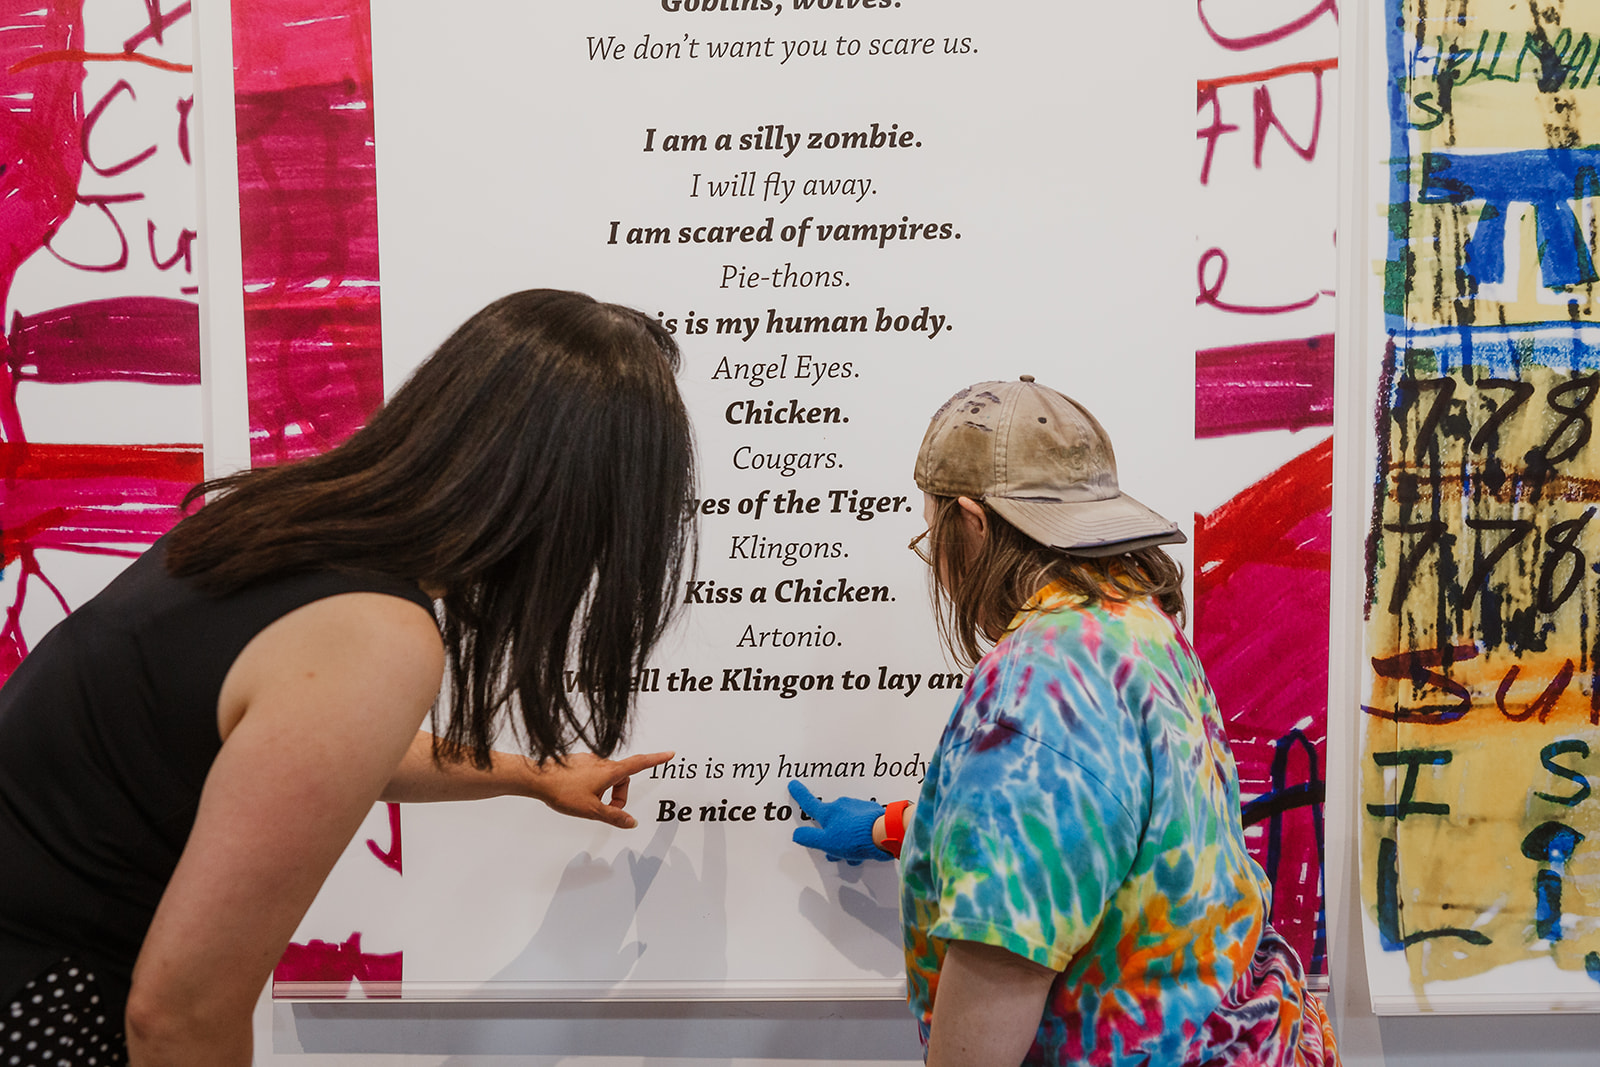 Teresa Pocock shows Jenny Kwan the text 'my human body' in her poem, 'Eyes of the Tiger' on July 22, 2019. Photo: This Is It Studios.